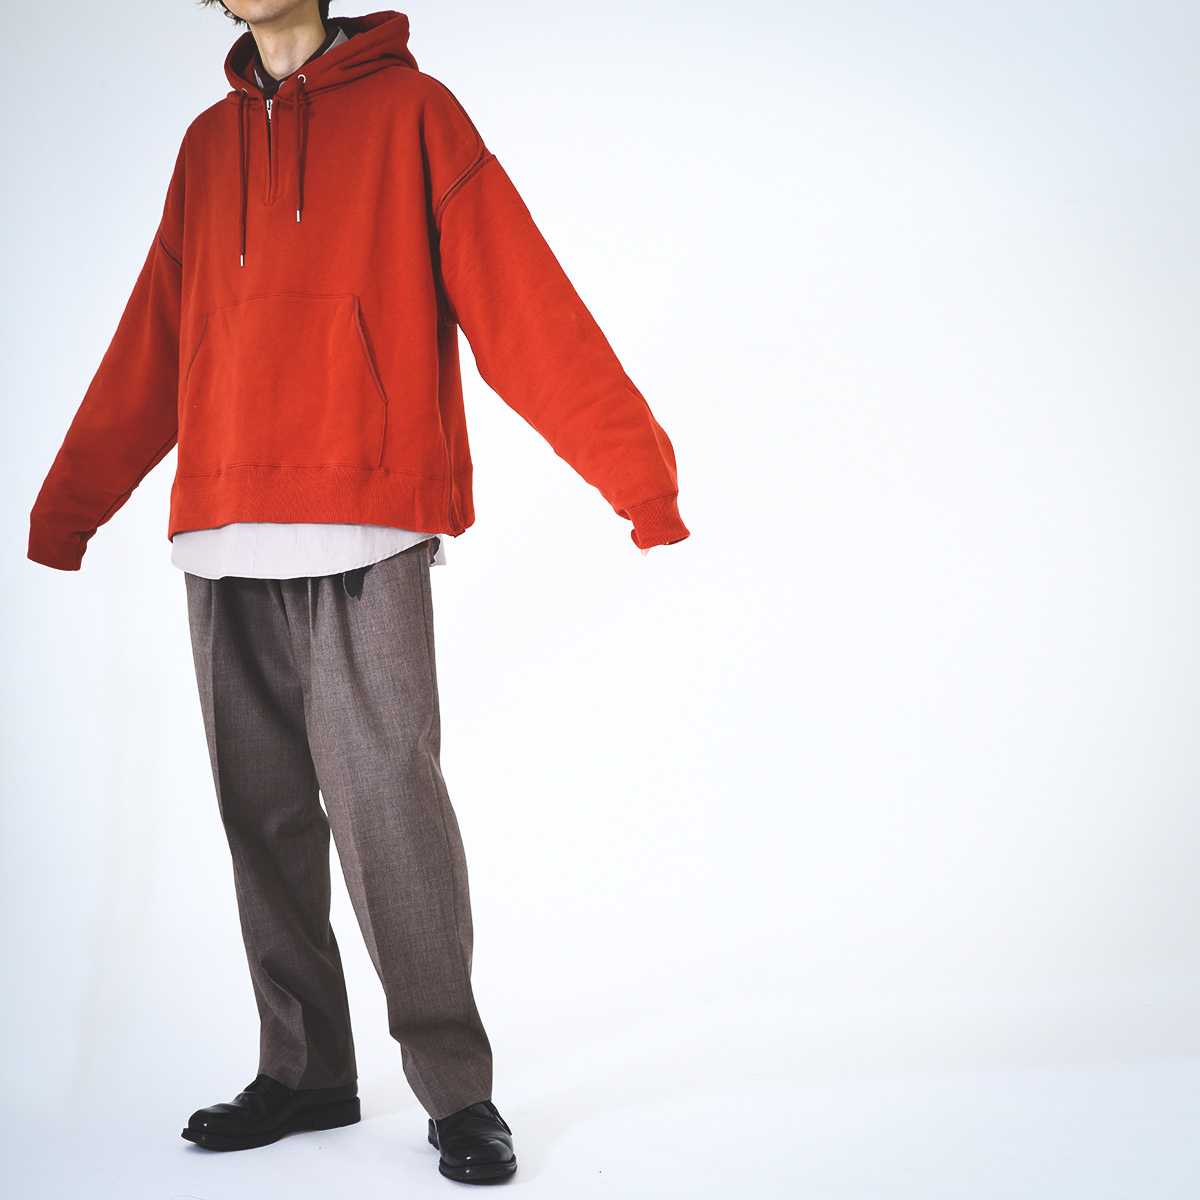 YOKE×ARKnets 2020AW EXCLUSIVE ITEM | ARKnets | メンズファッション ...